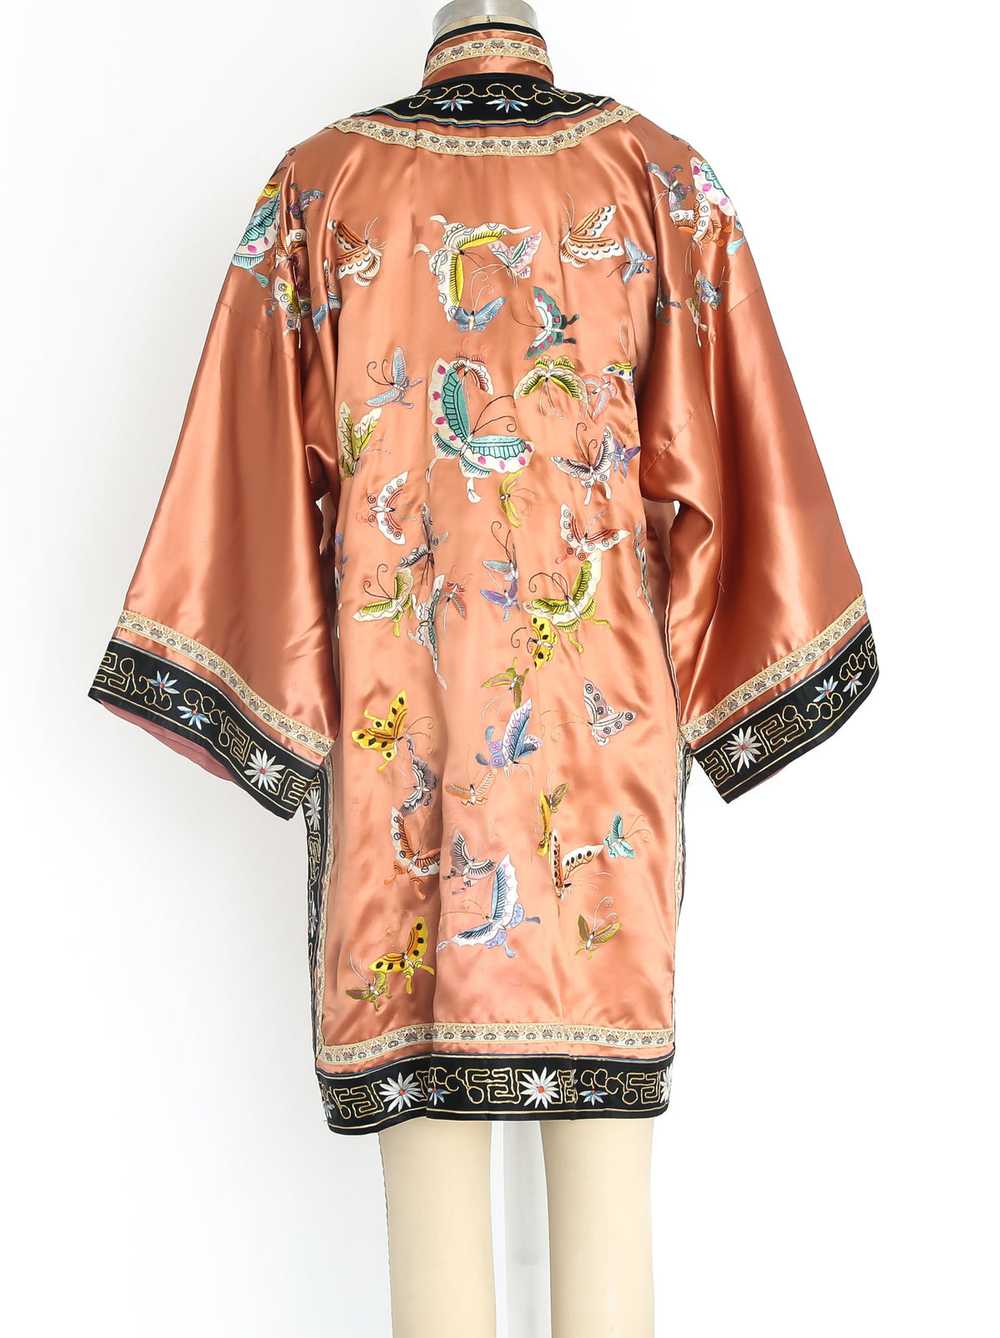 Hand Embroidered Chinese Silk Robe - image 3